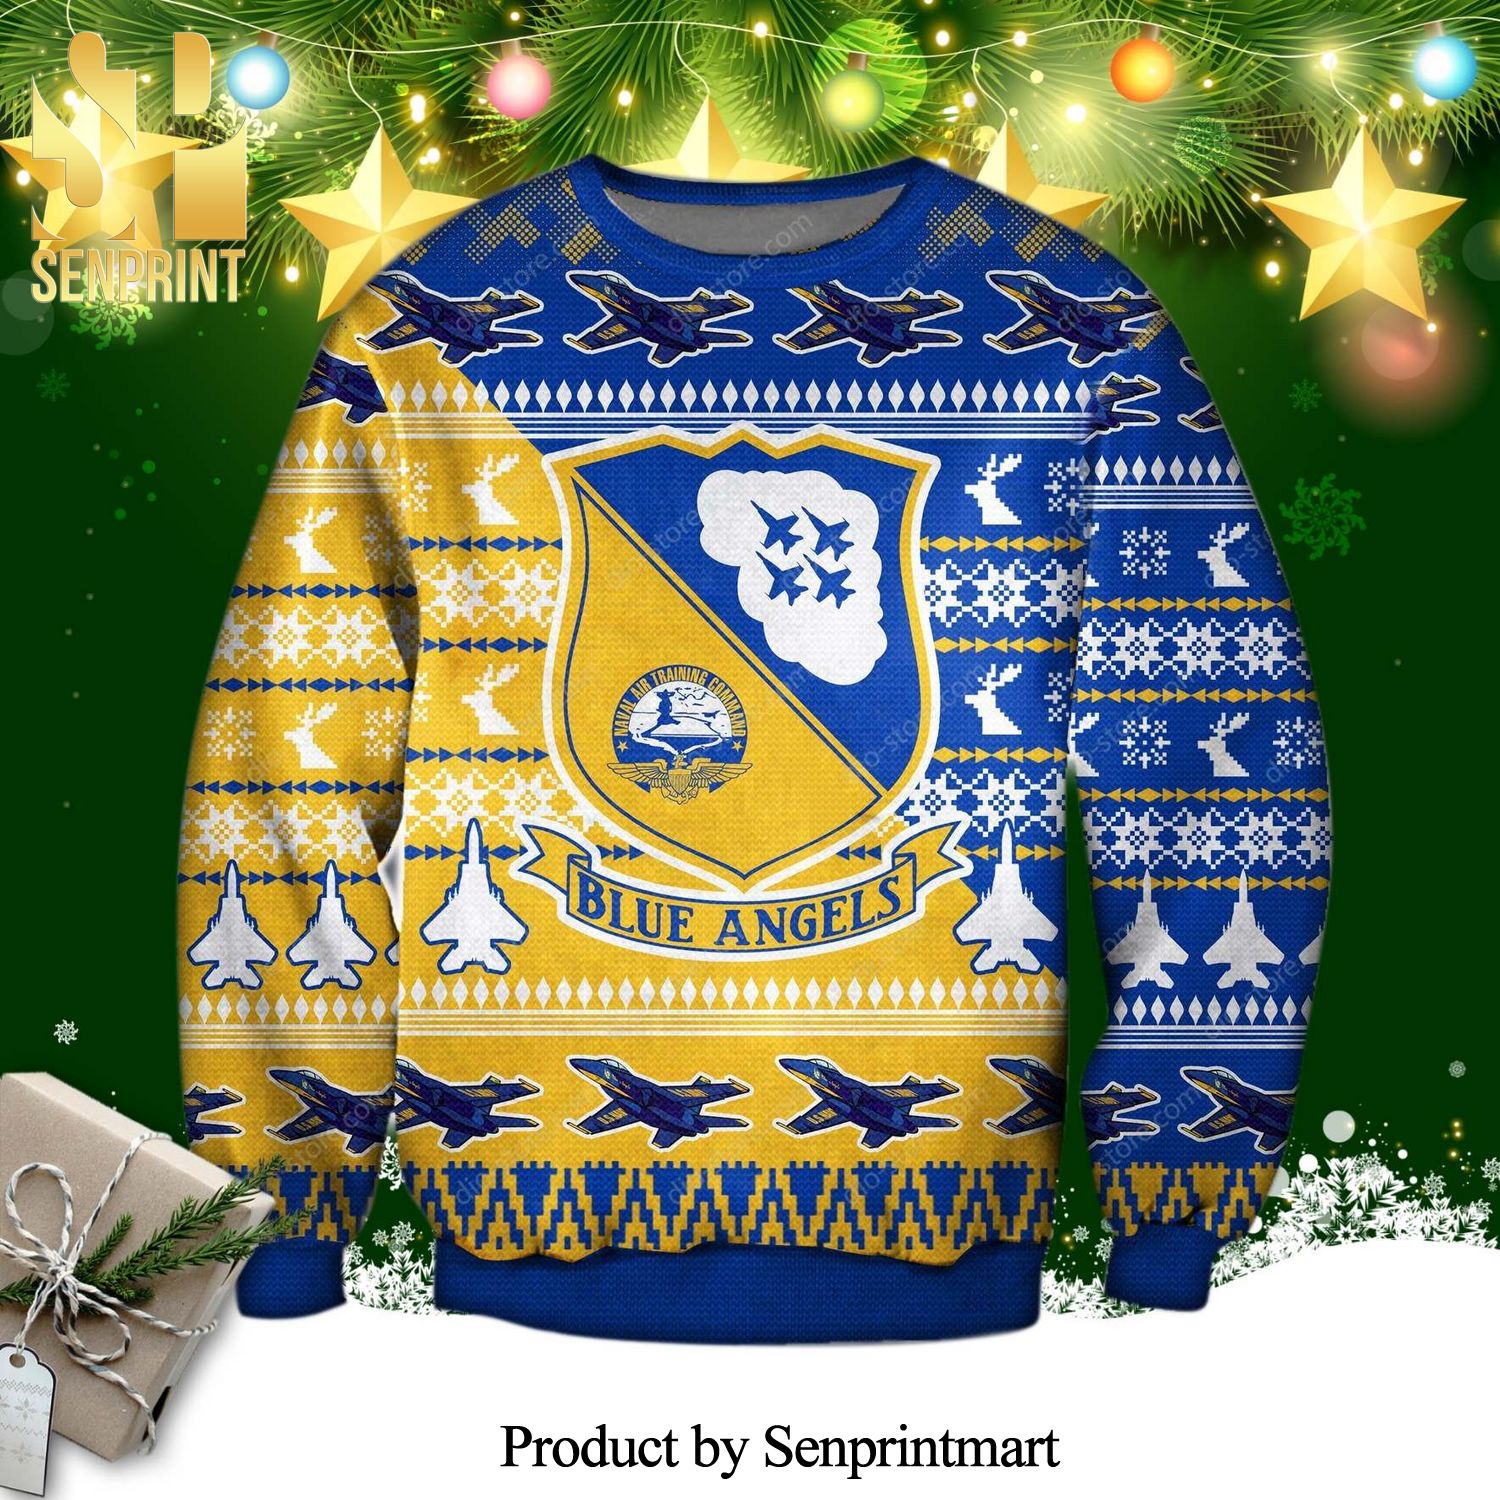 Blue Angels Air Force Knitted Ugly Christmas Sweater